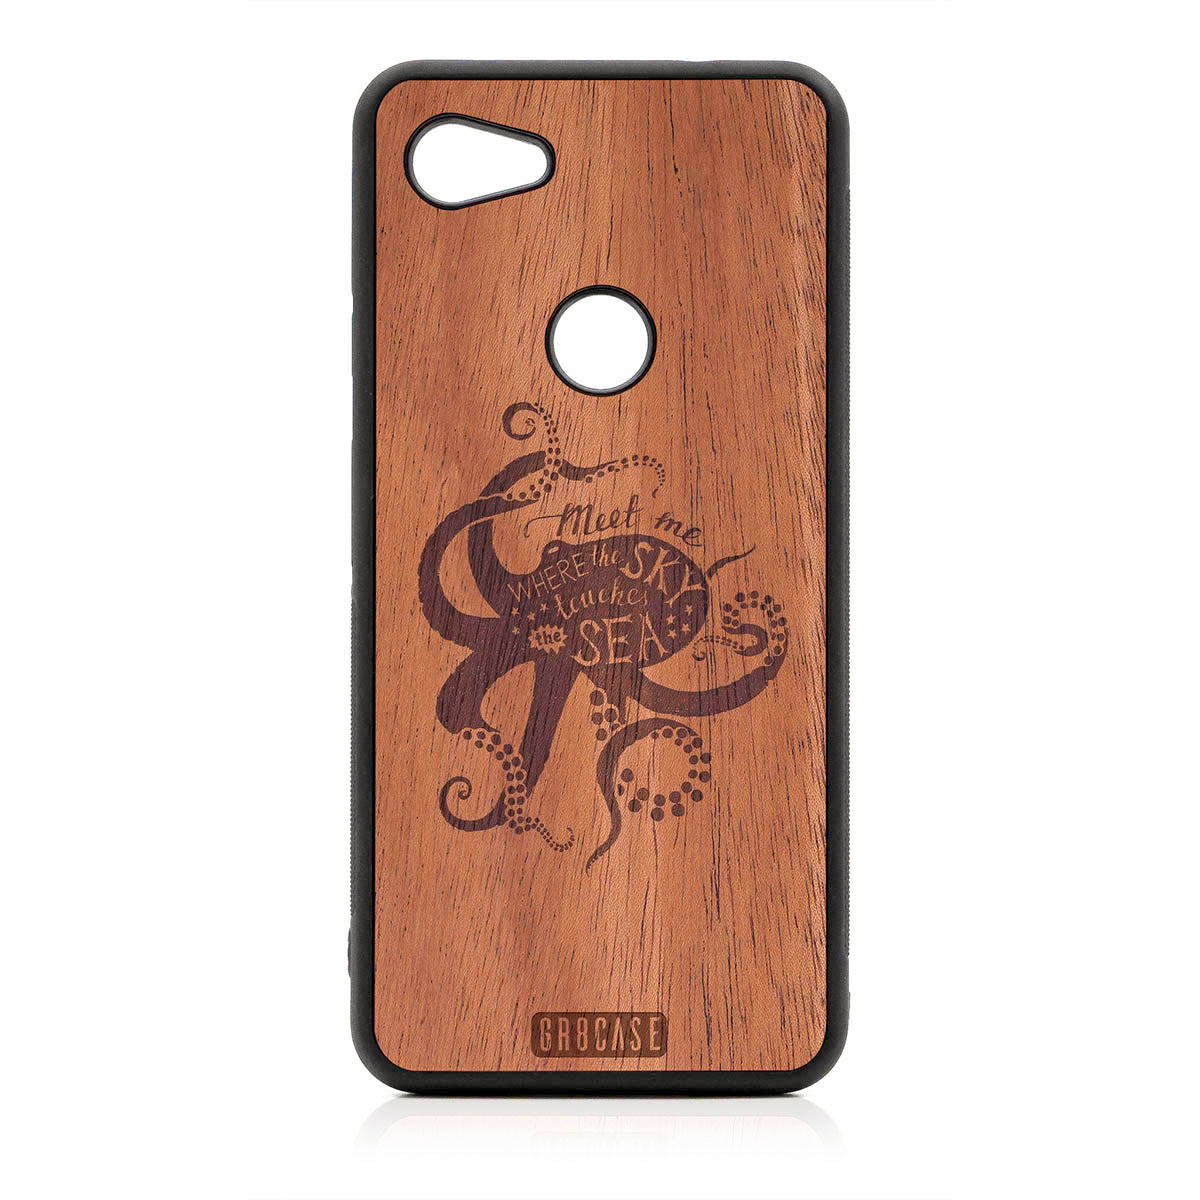 Meet Me Where The Sky Touches The Sea (Octopus) Design Wood Case For Google Pixel 3A